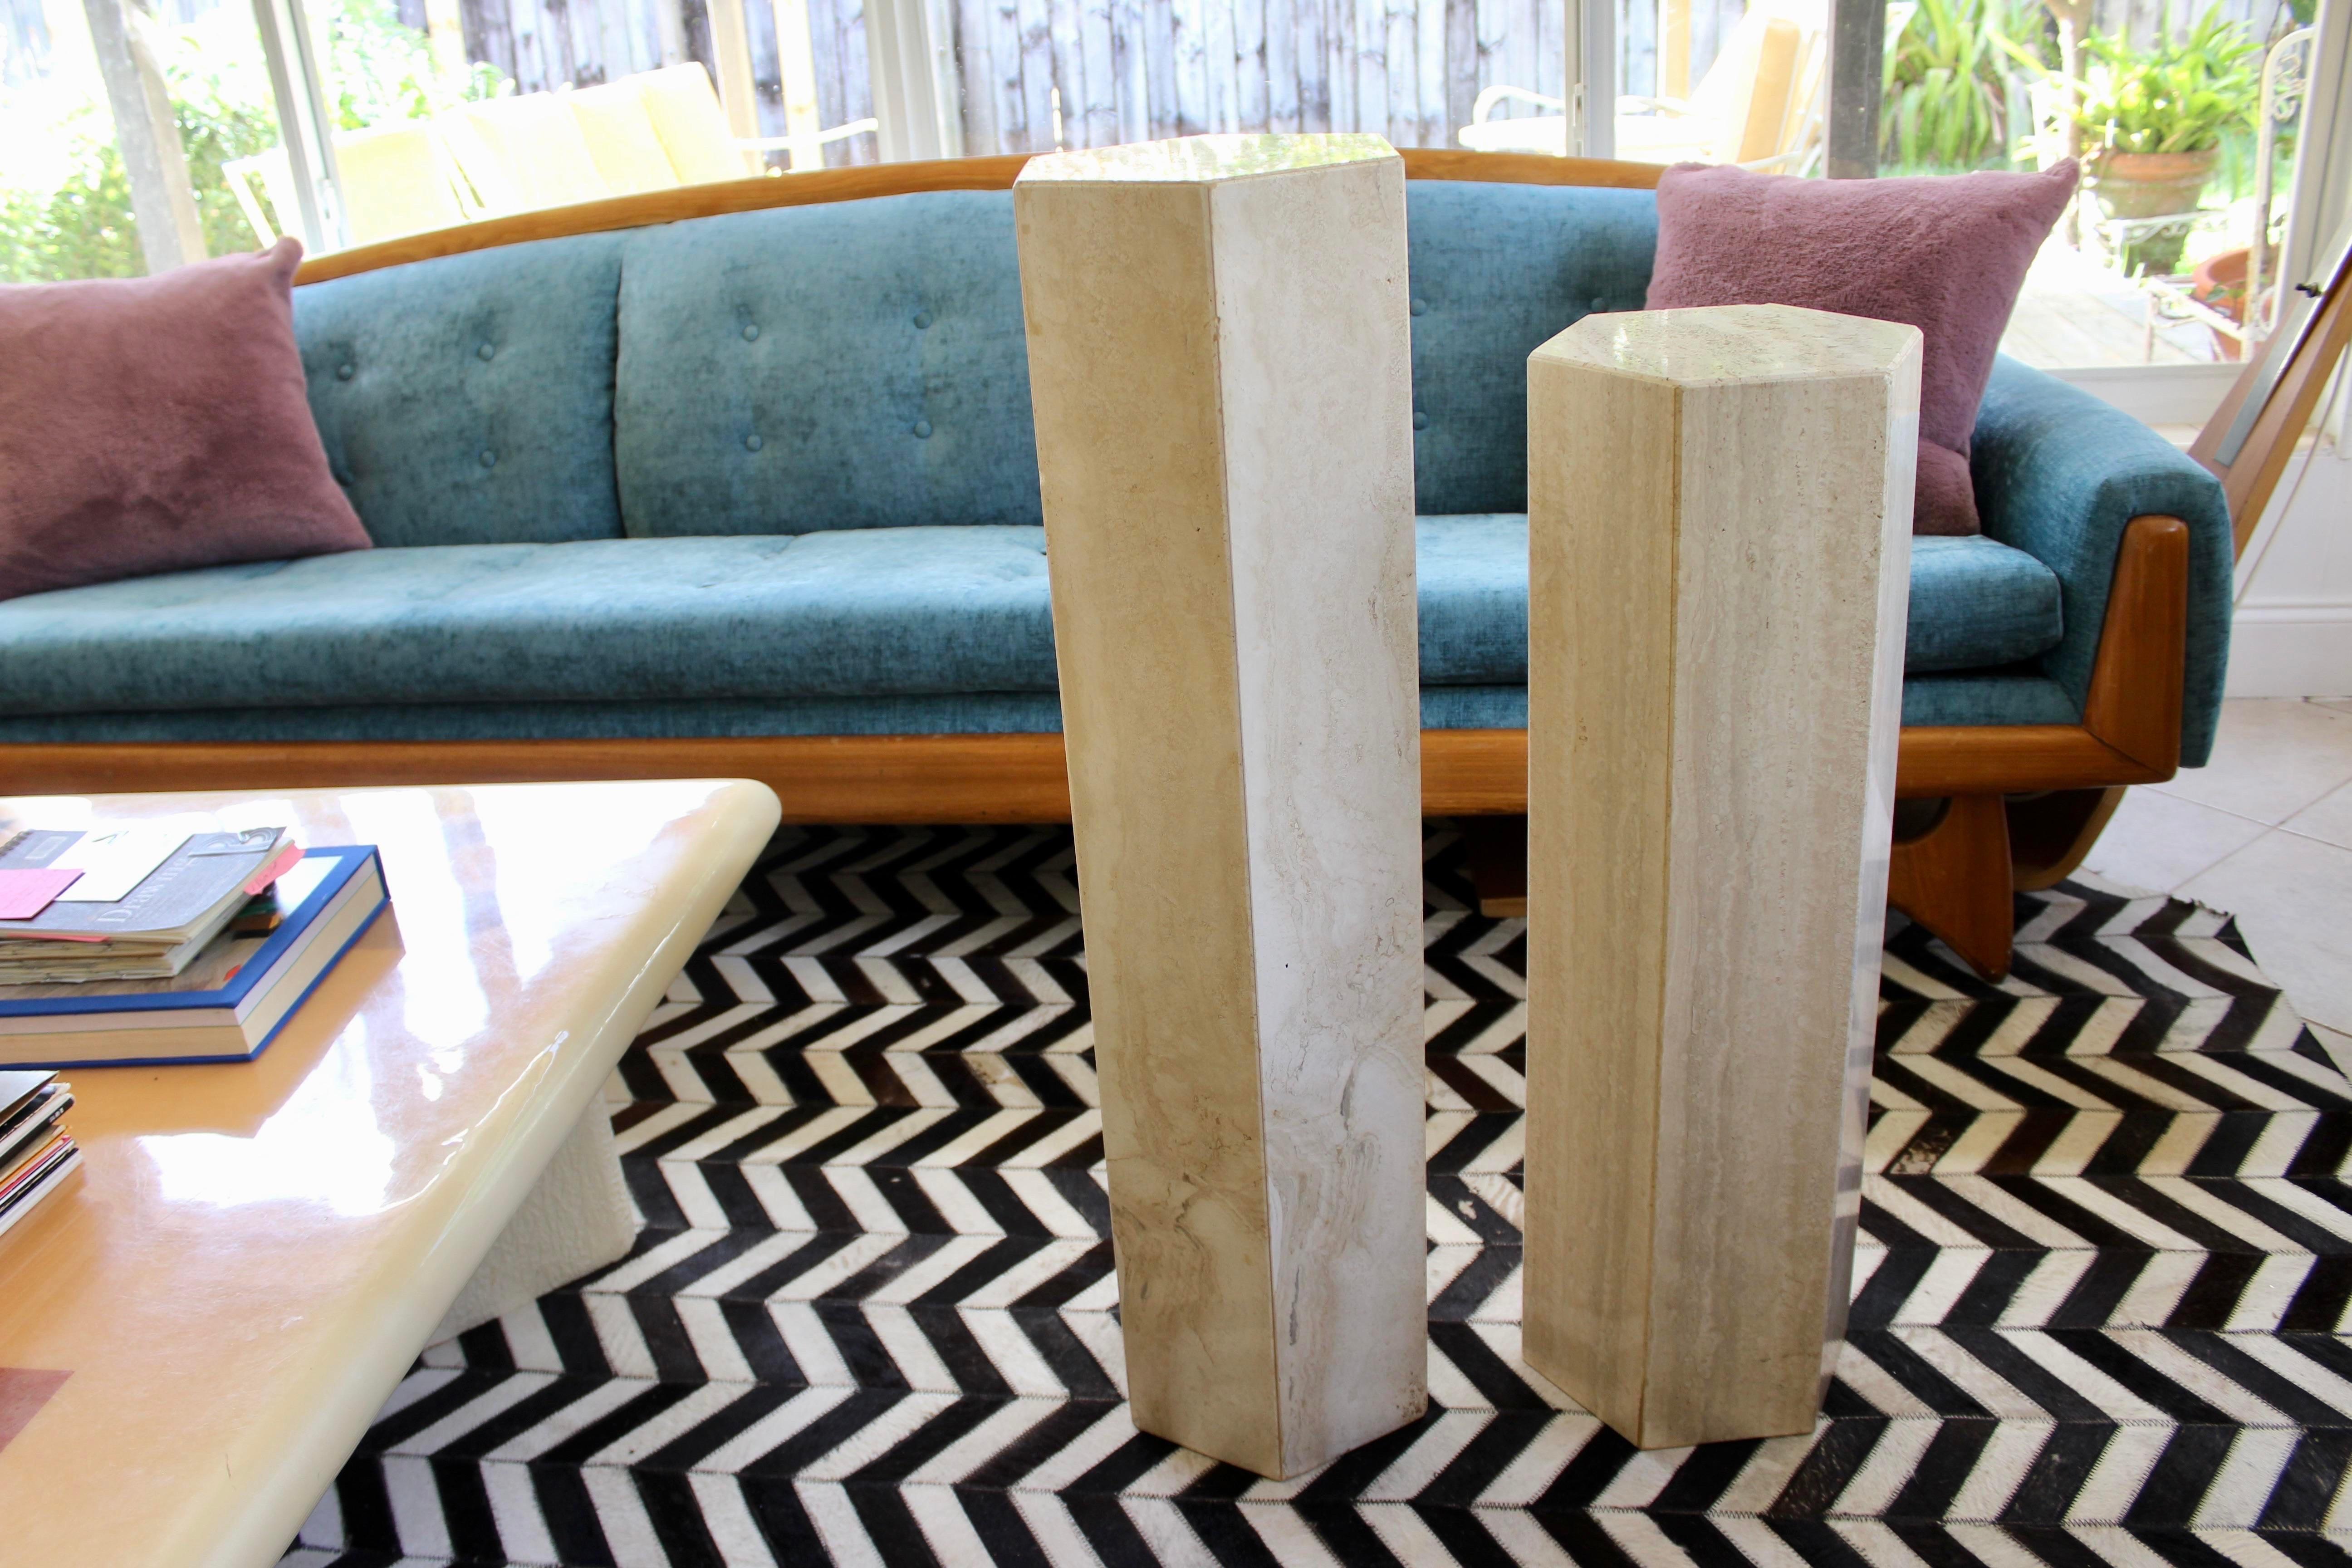 Set of two beautiful vintage midcentury modern polished marble pedestal columns. This set of pedestal columns features a modern/contemporary design, with clean lines and unique octagonal shape. The color is light neutral with warm beige and gray